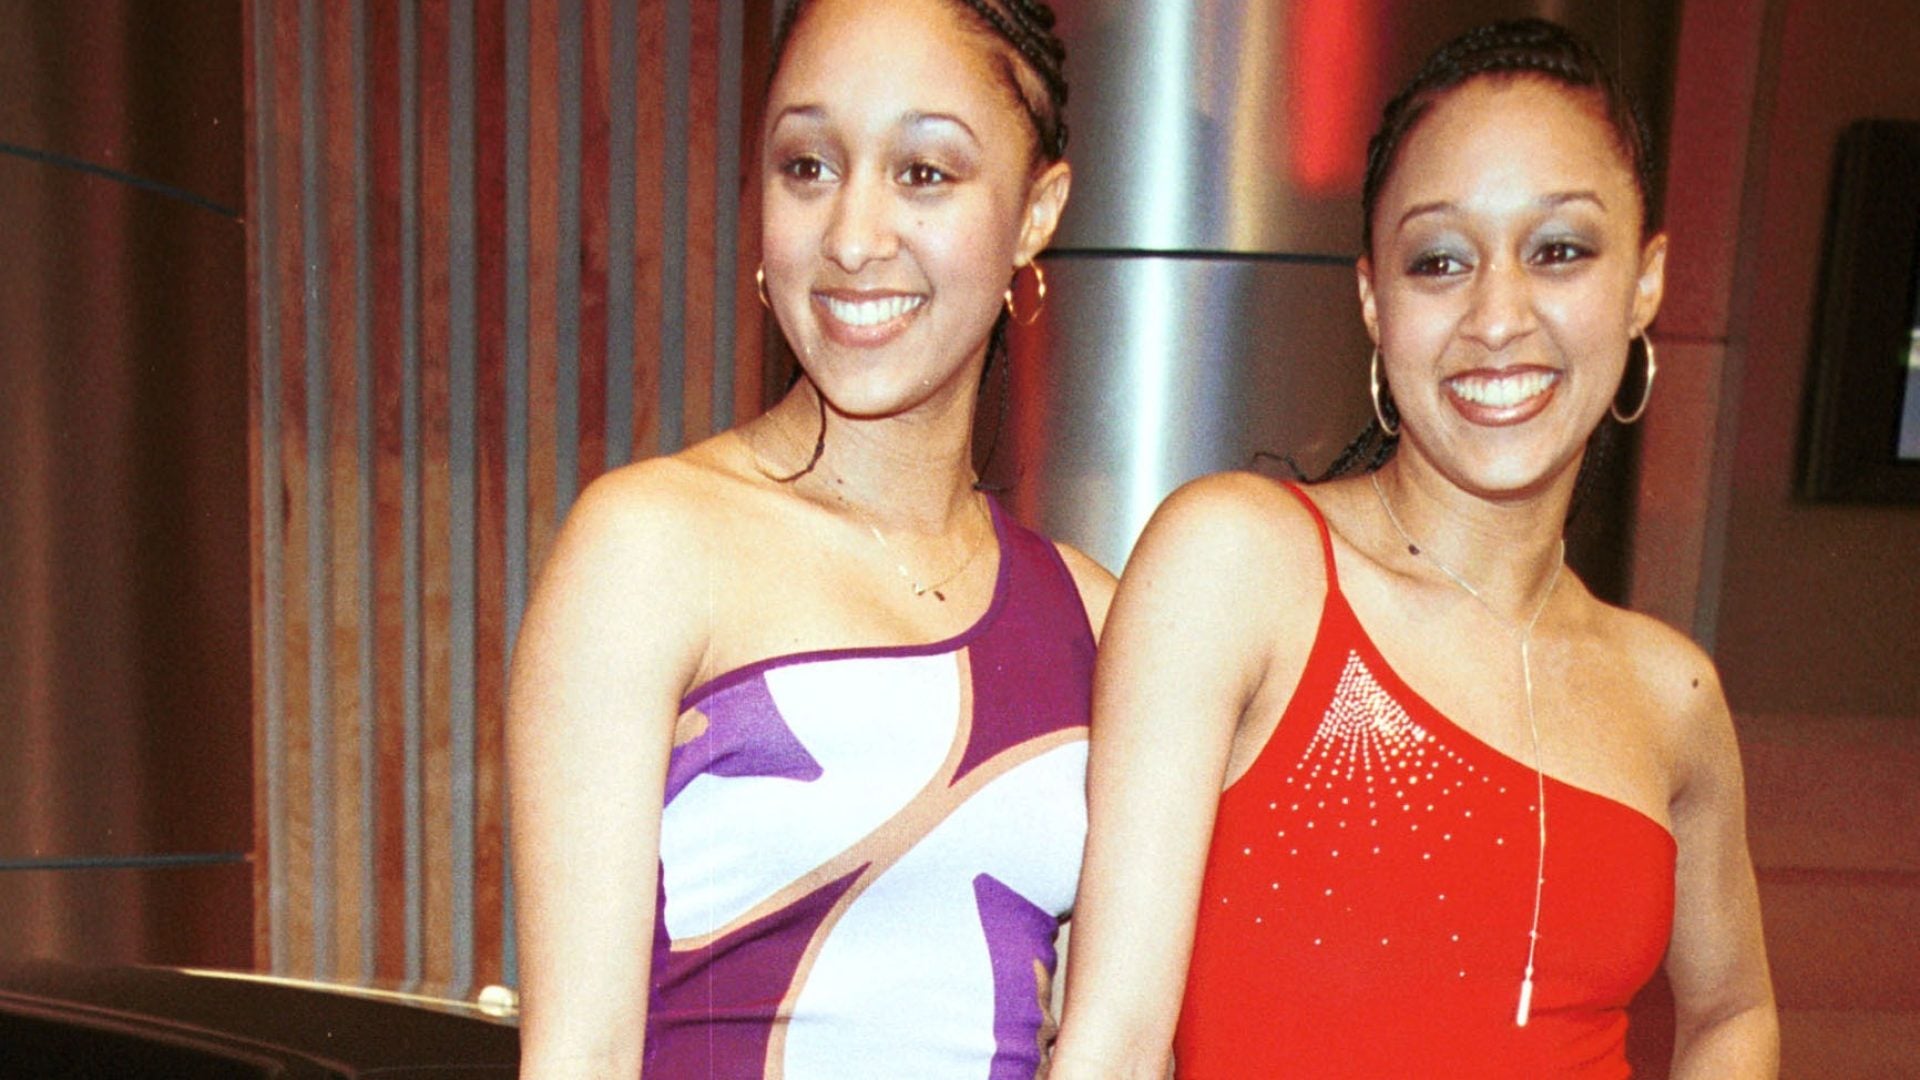 Channeling Nostalgia With This Celebrity Look: Tia And Tamera Mowry